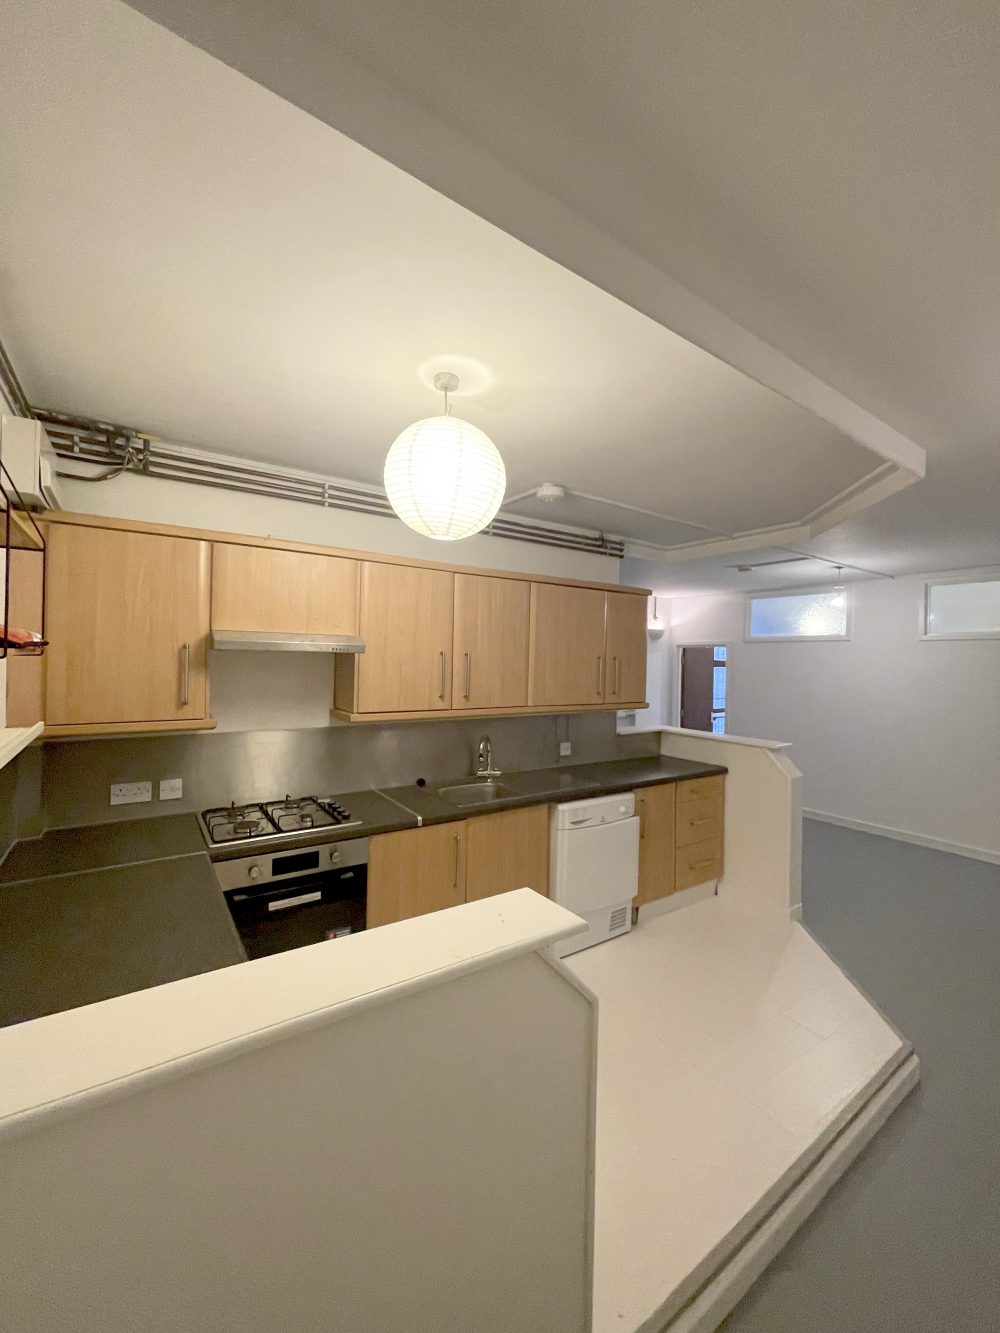 2 Bedroom Flat Available to rent in E9 London Fields Enterprise House Pic44